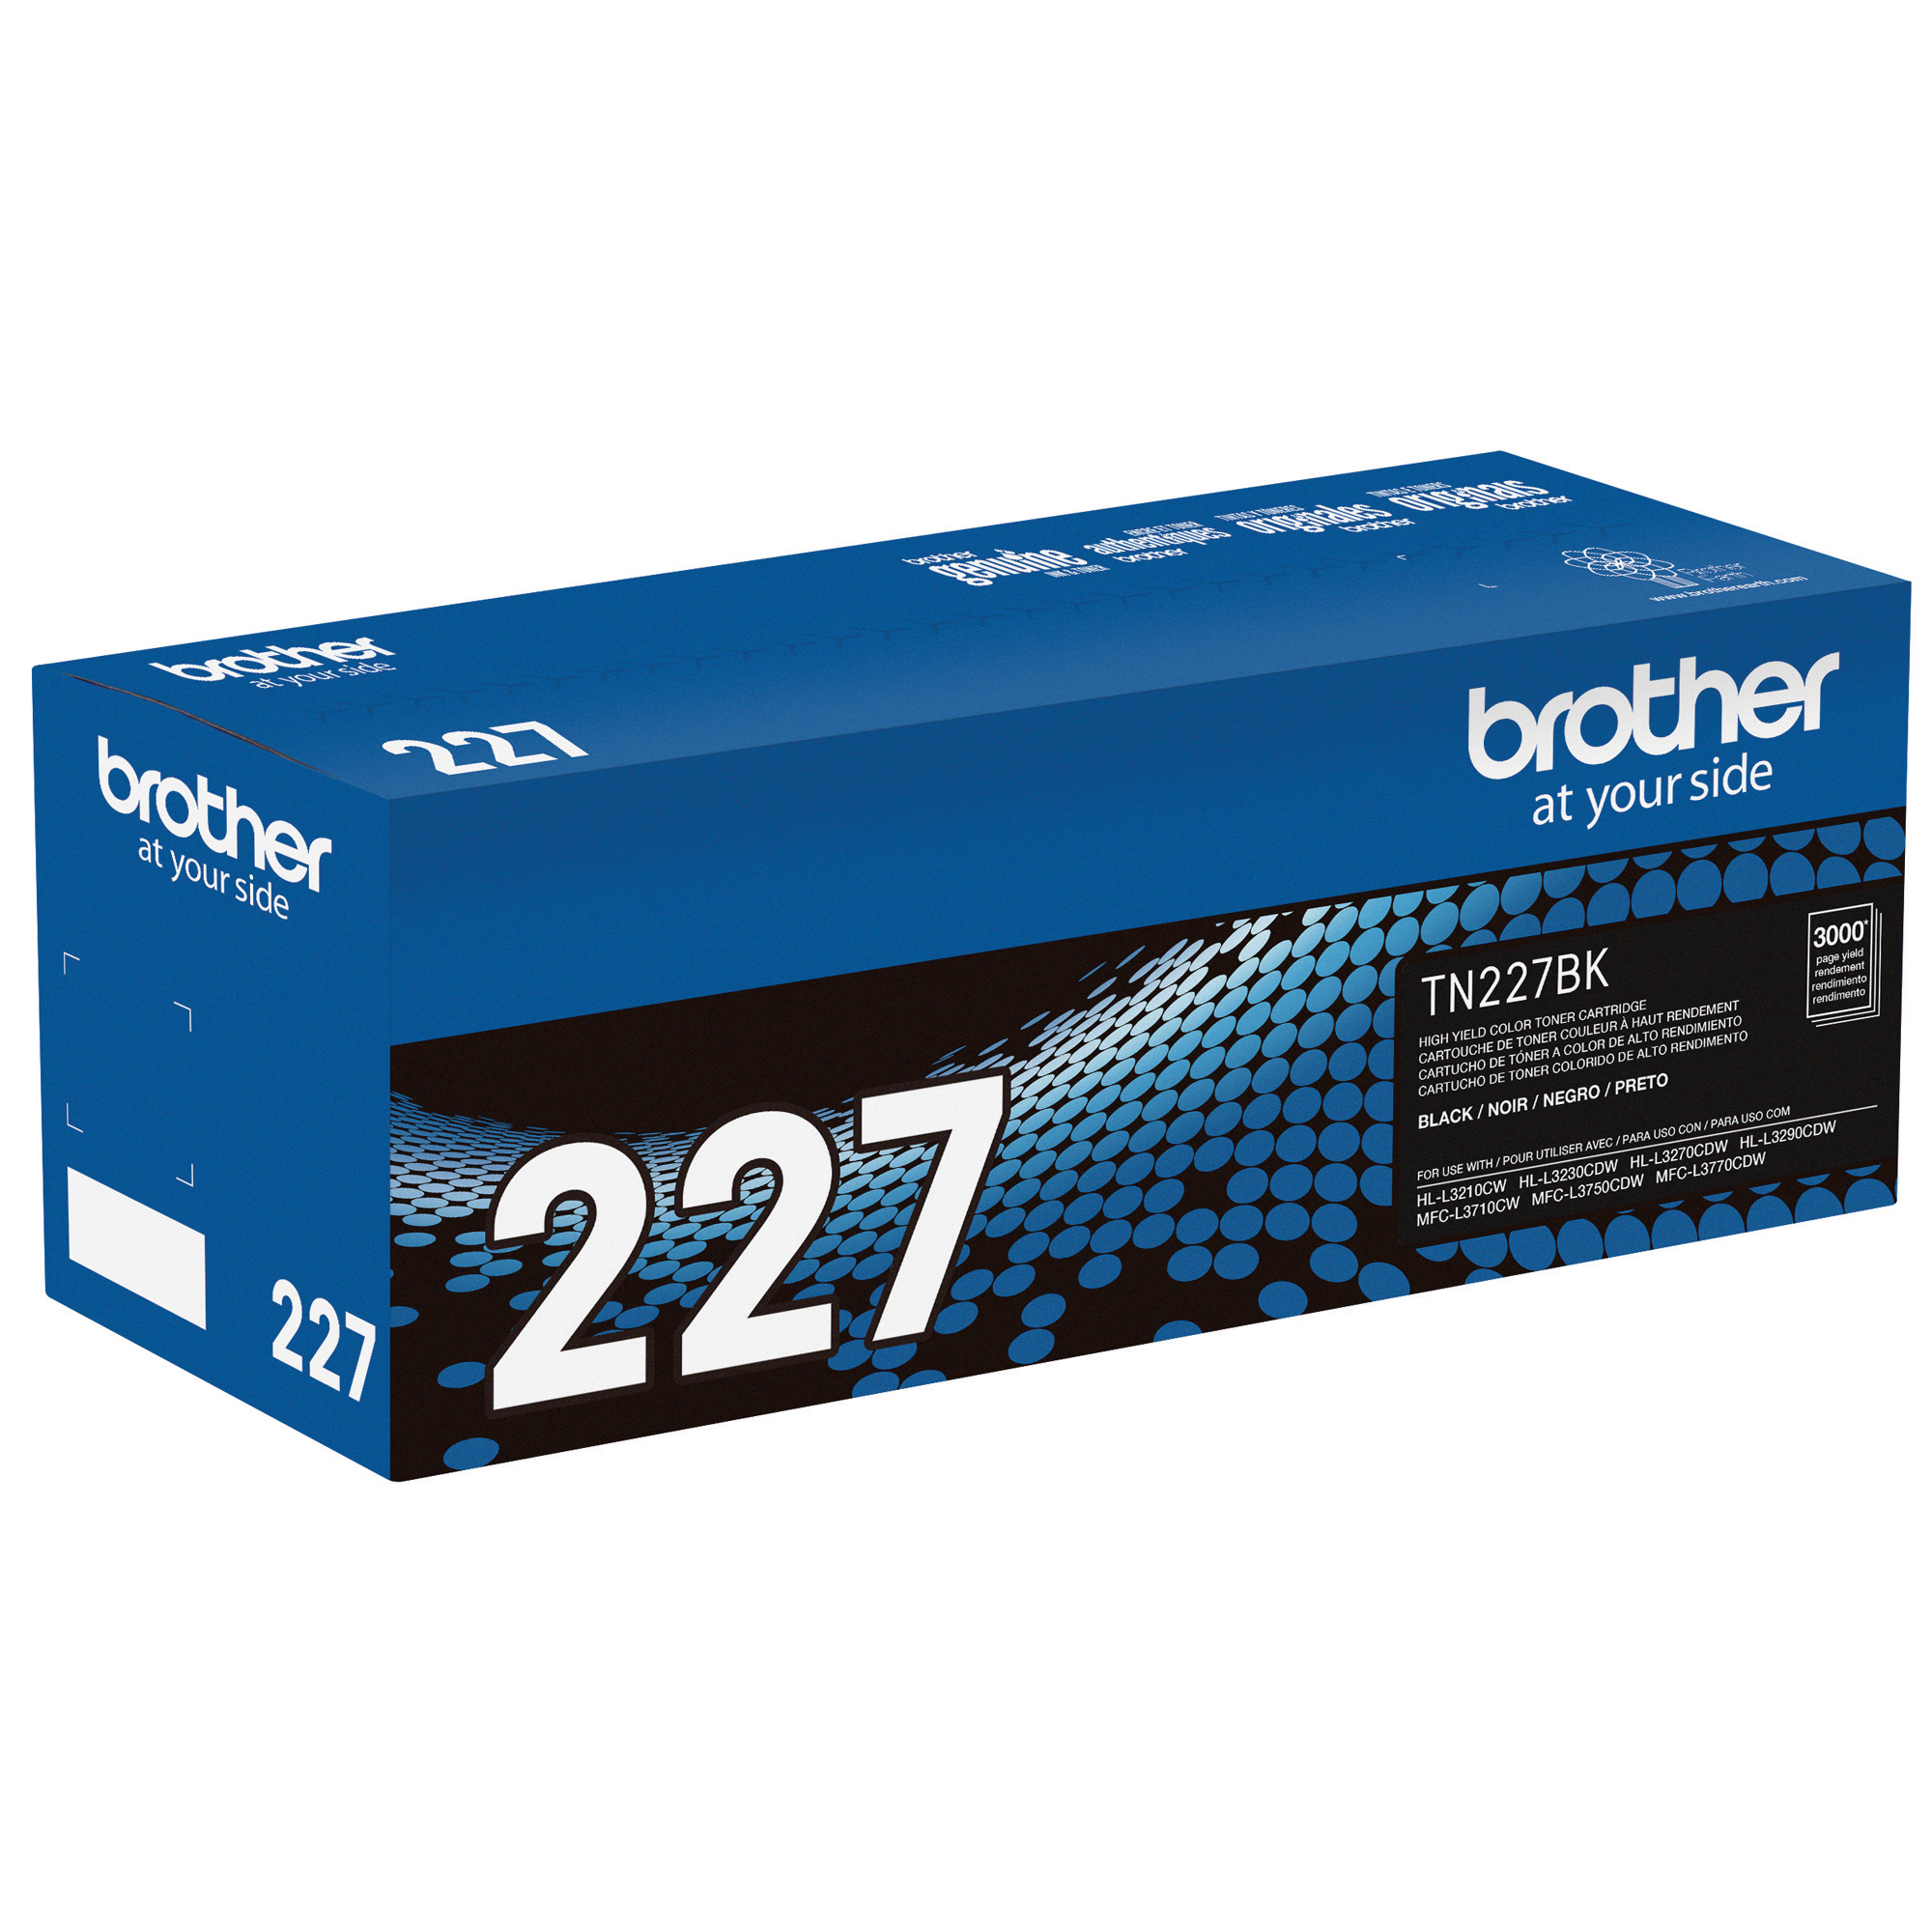 BROTHER MFC-L3710CW colour, multi-function, all in one printer,  photocopier, copier sales supplier in West Sussex, East Sussex, Kent and  Surrey